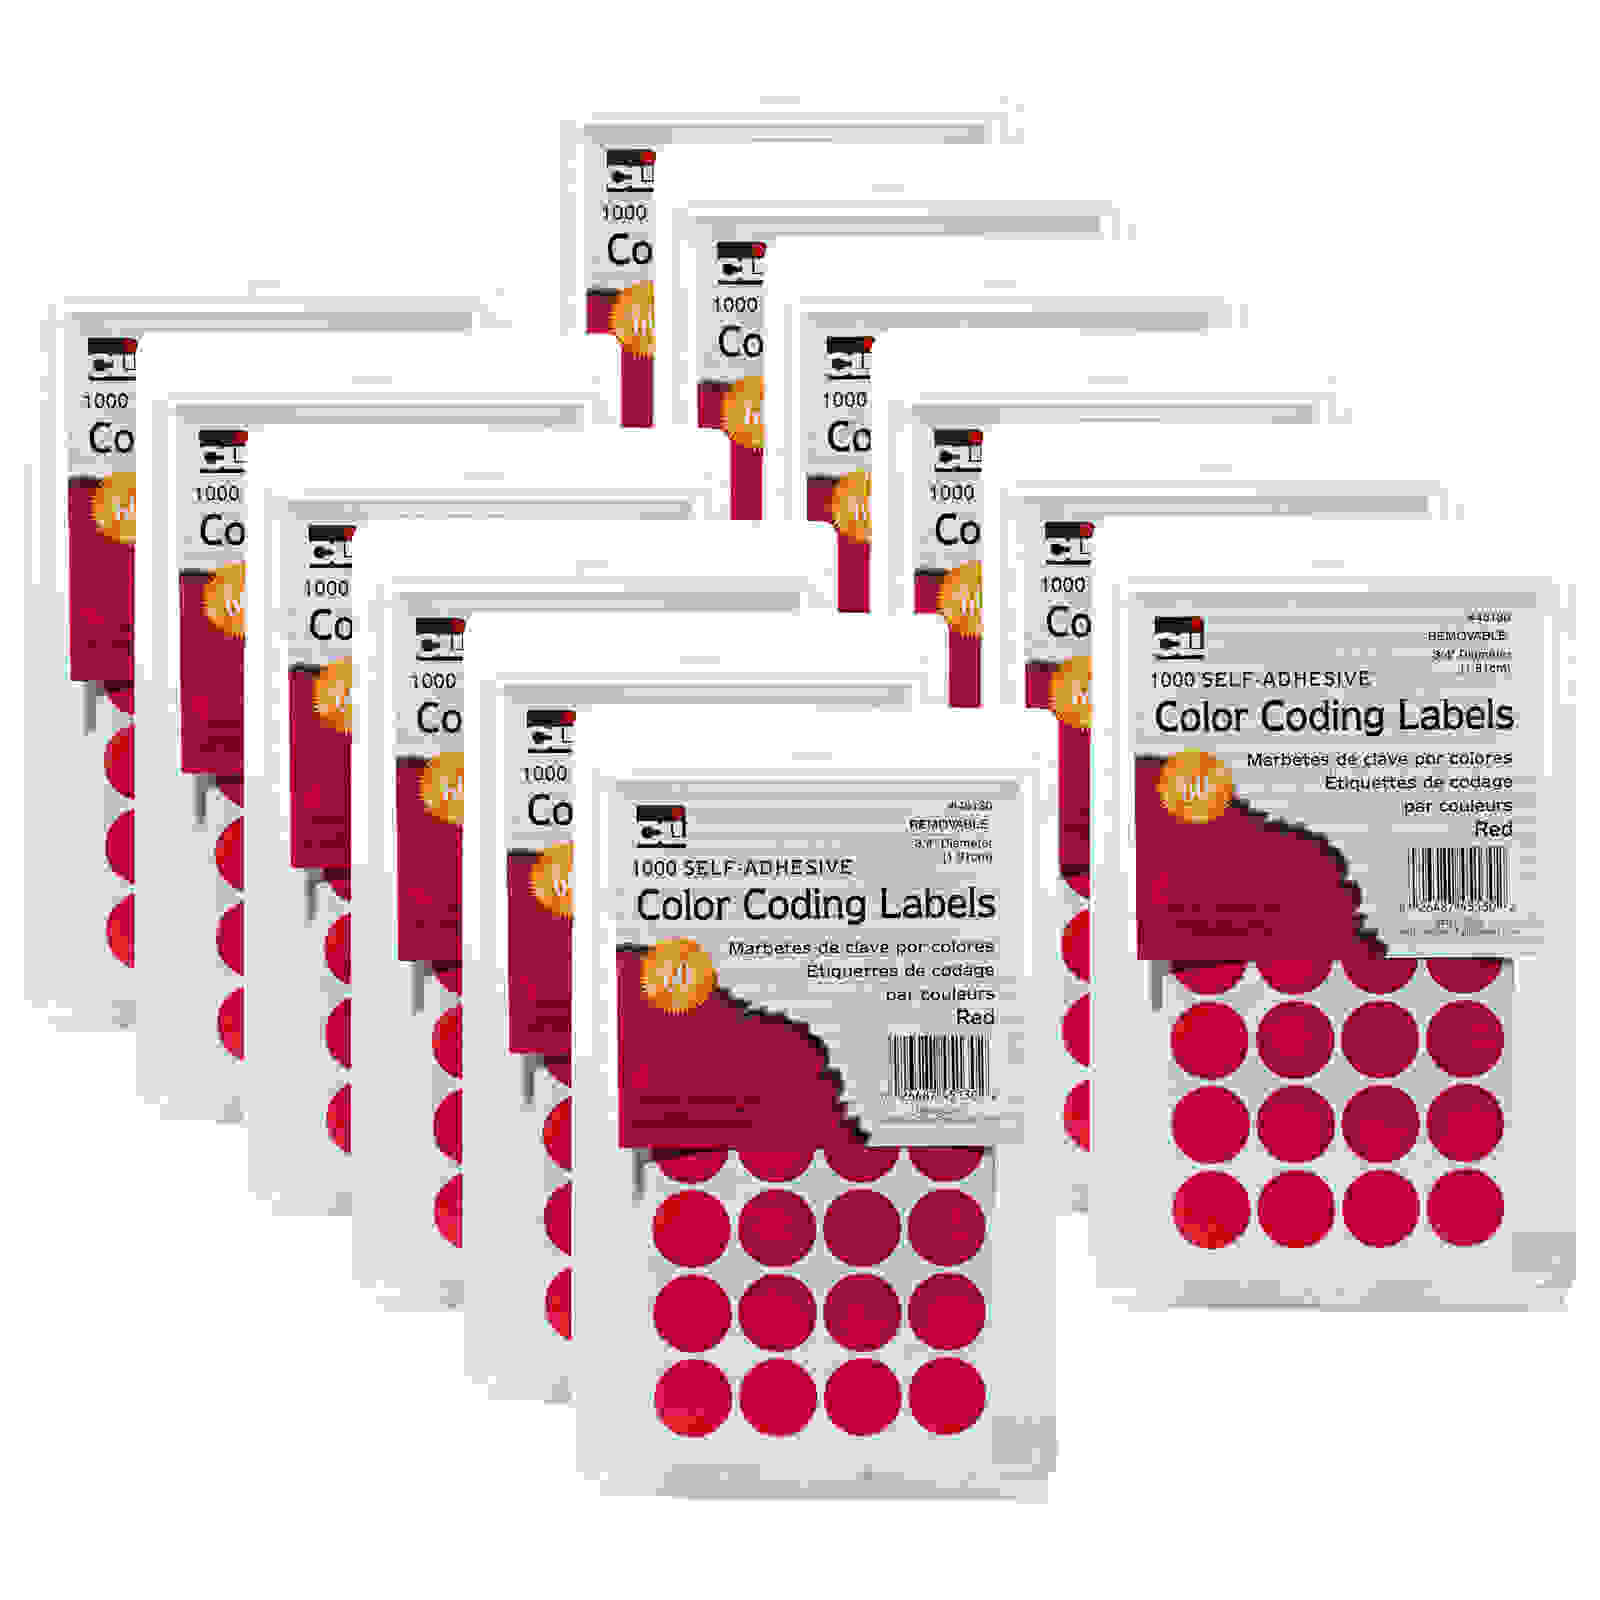 Color Coding Labels, 3/4", Red, 1000 Per Pack, 12 Packs